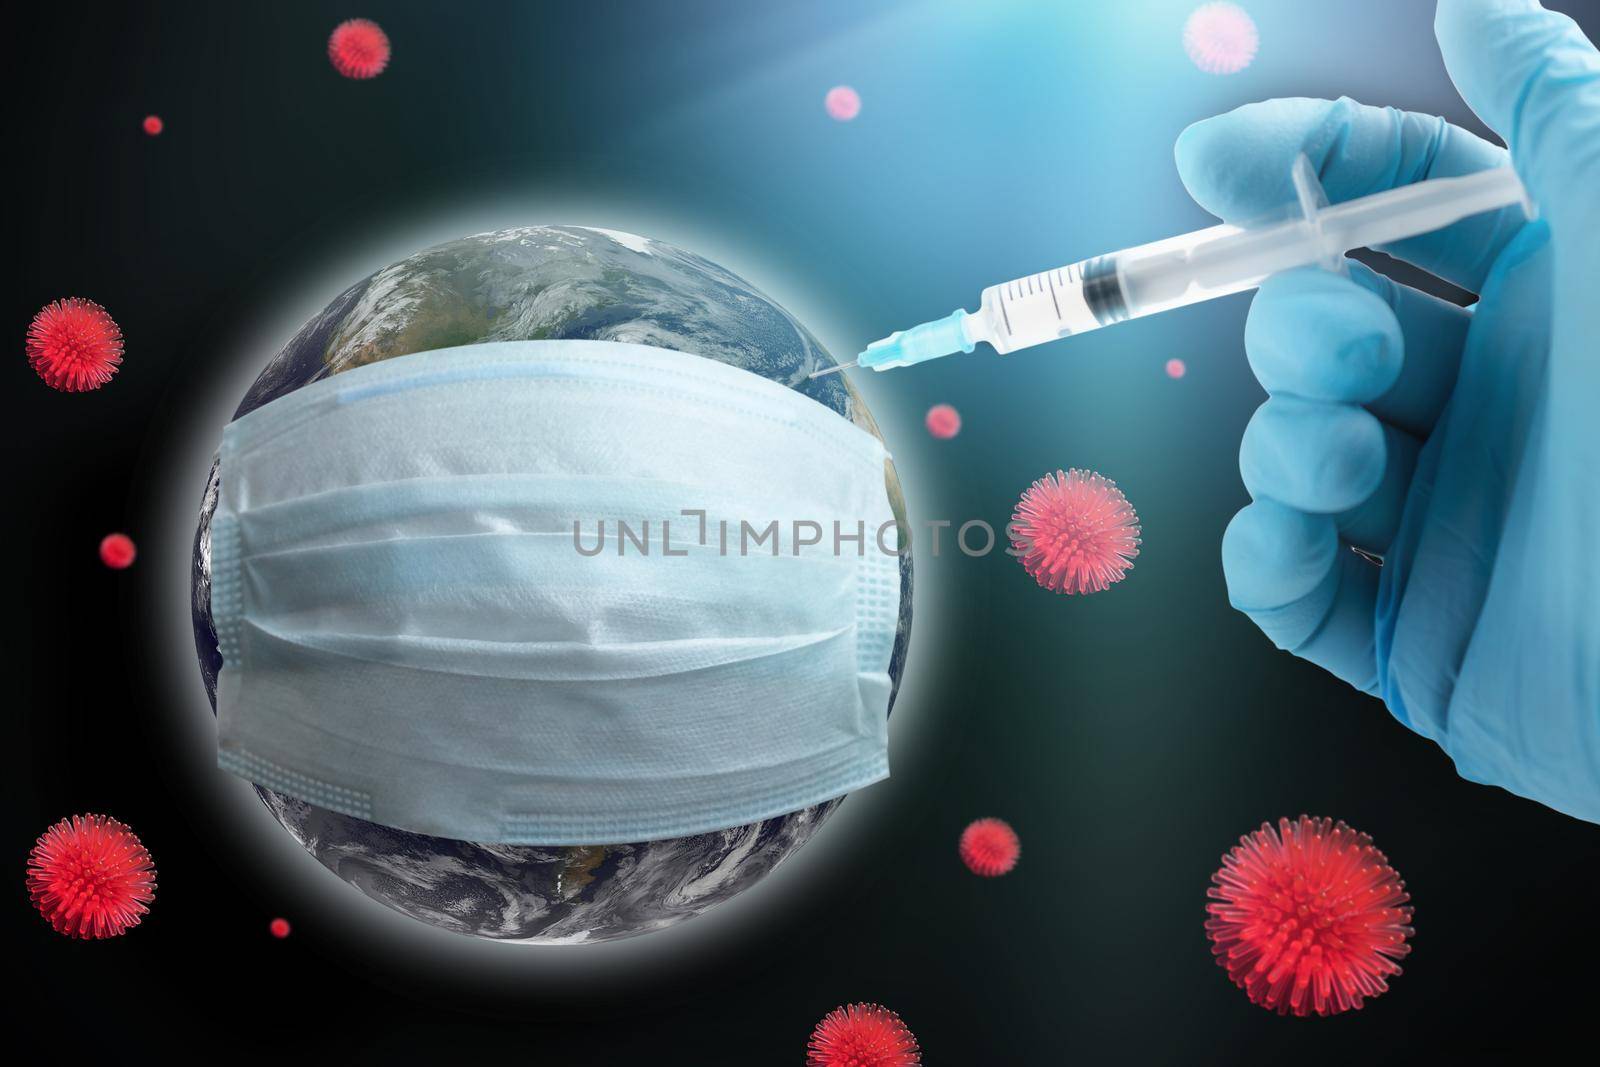 Coronavirus global vaccination concept. Earth in a protective mask, hand with a syringe makes an injection. Earth image courtesy of NASA by galsand